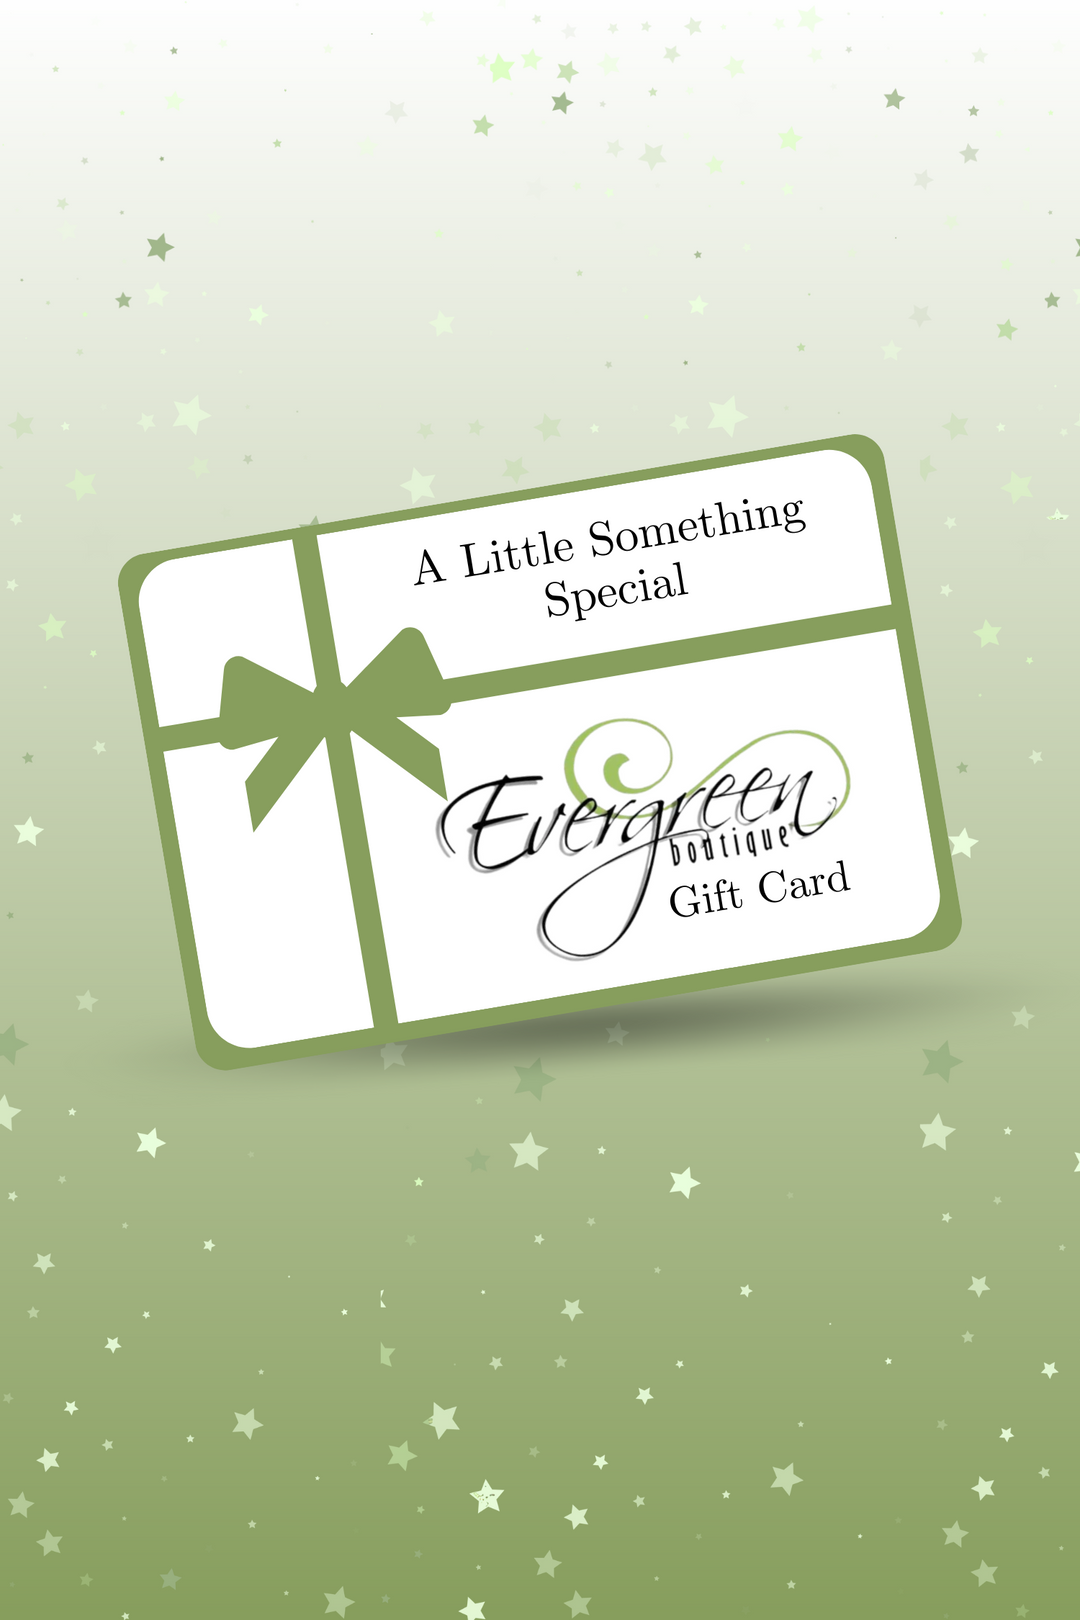 Evergreen Boutique Gift Card-Gift Cards-Evergreen Boutique, LLC-Evergreen Boutique, Women’s Fashion Boutique in Santa Claus, Indiana